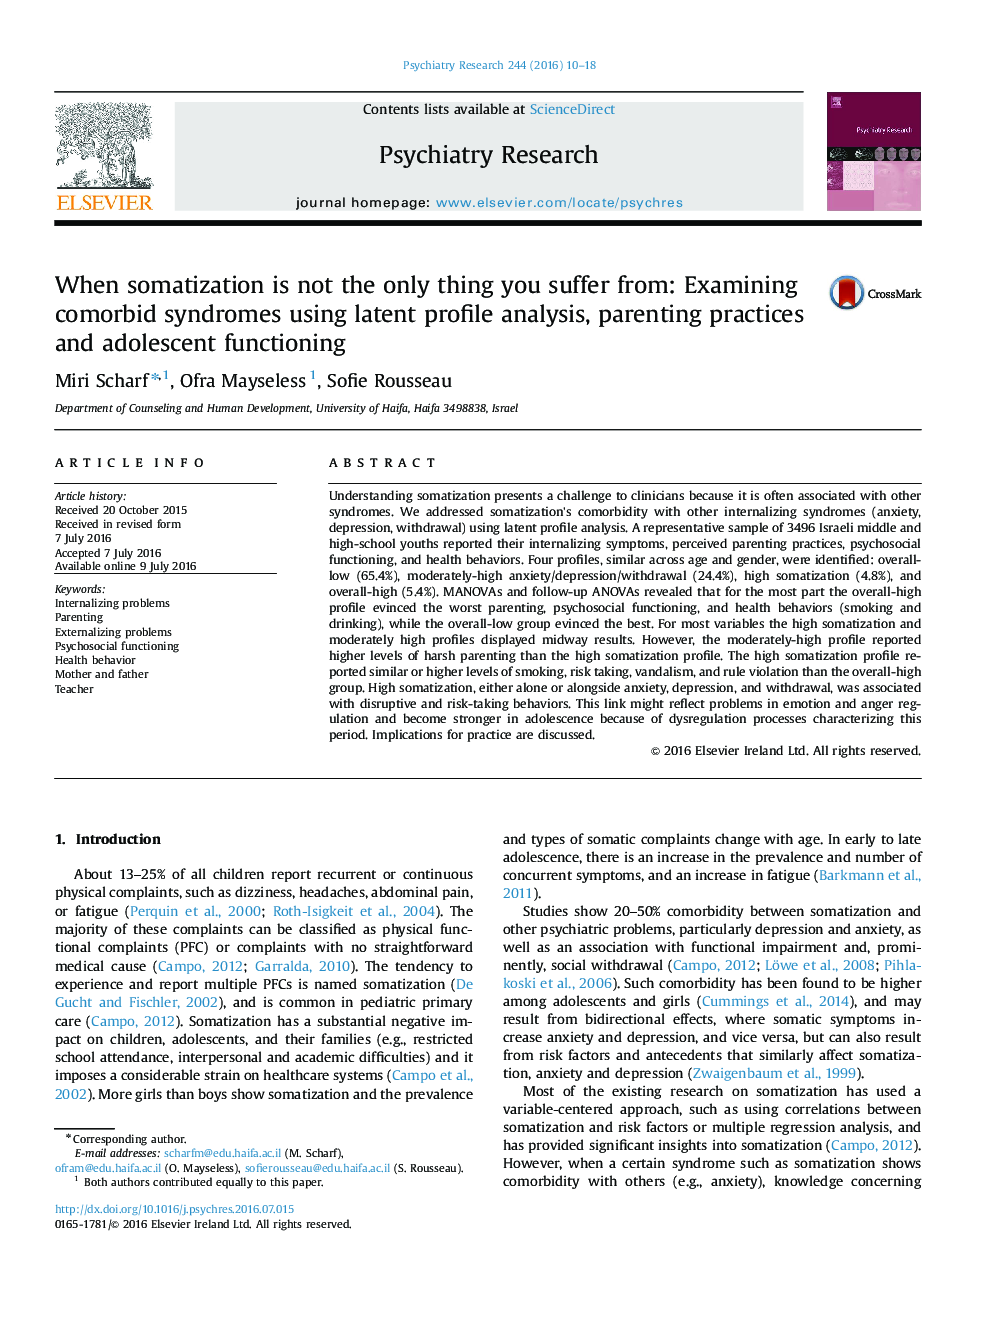 When somatization is not the only thing you suffer from: Examining comorbid syndromes using latent profile analysis, parenting practices and adolescent functioning